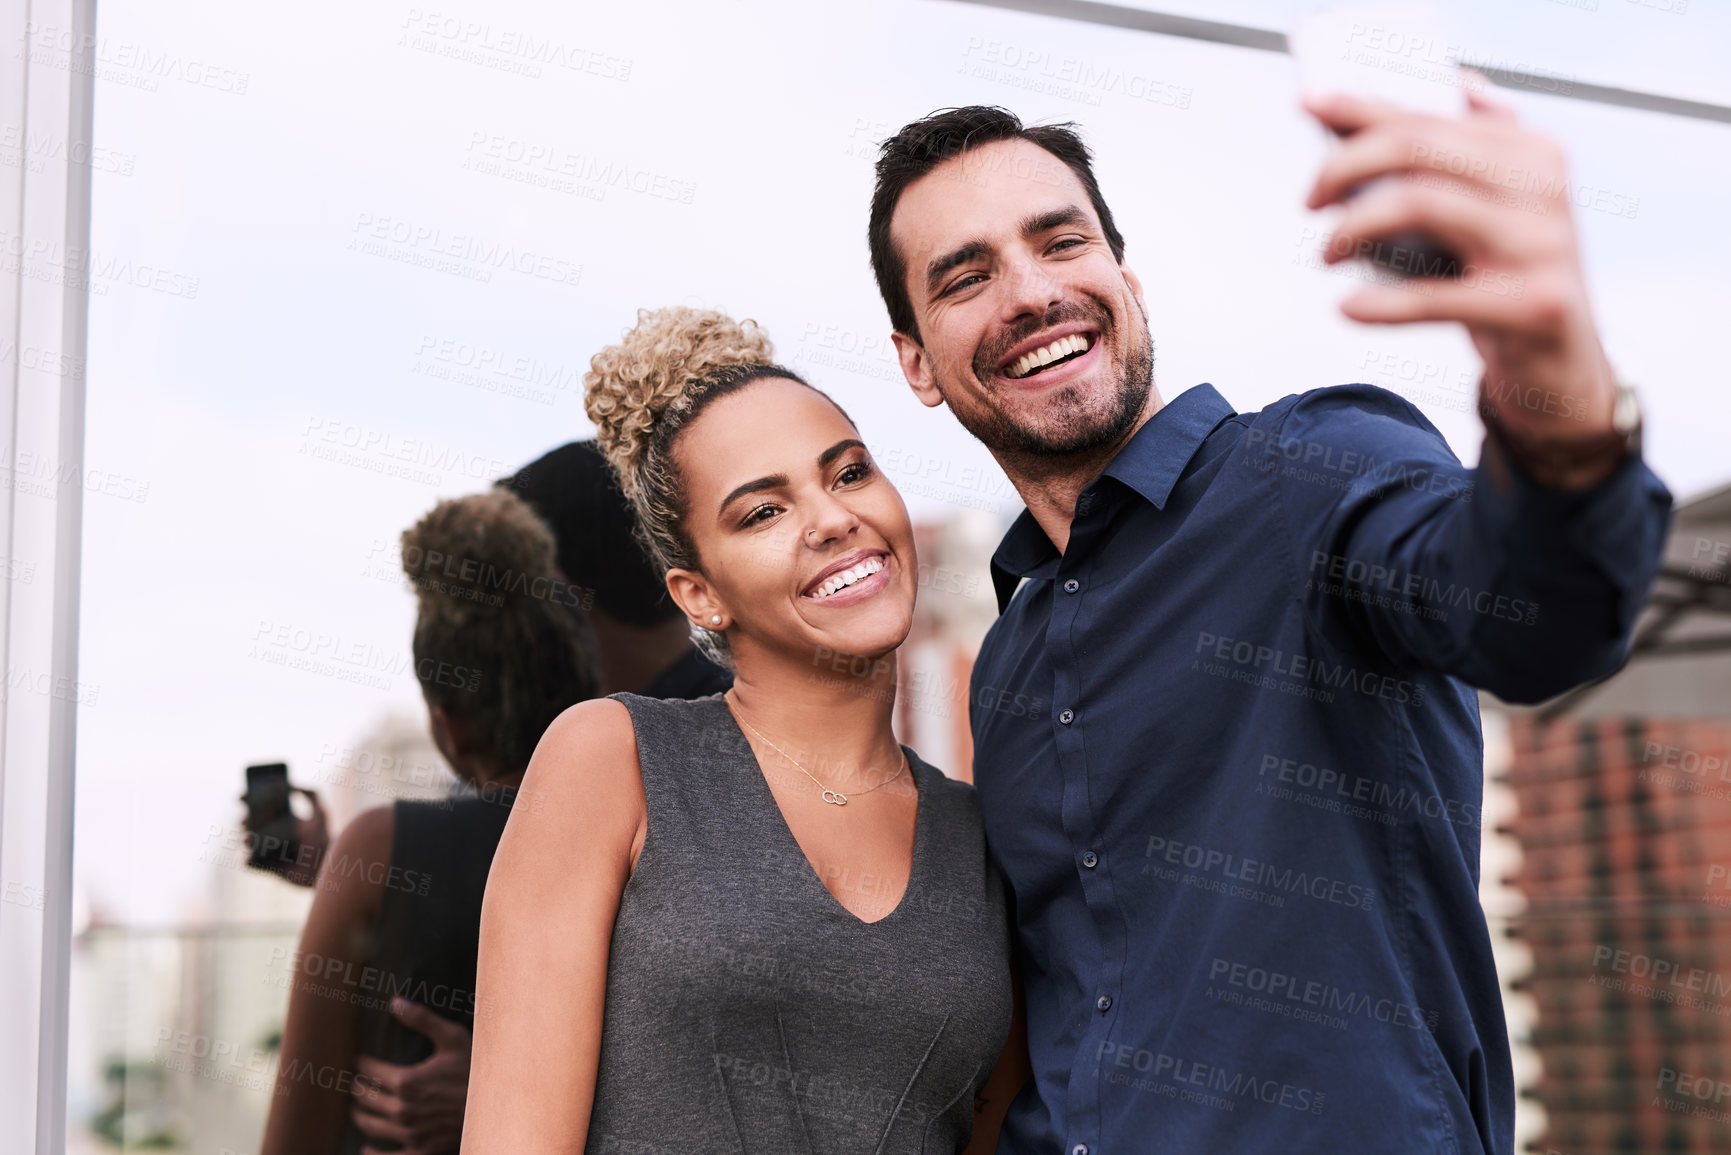 Buy stock photo Shot of two colleagues taking a selfie together outside an office